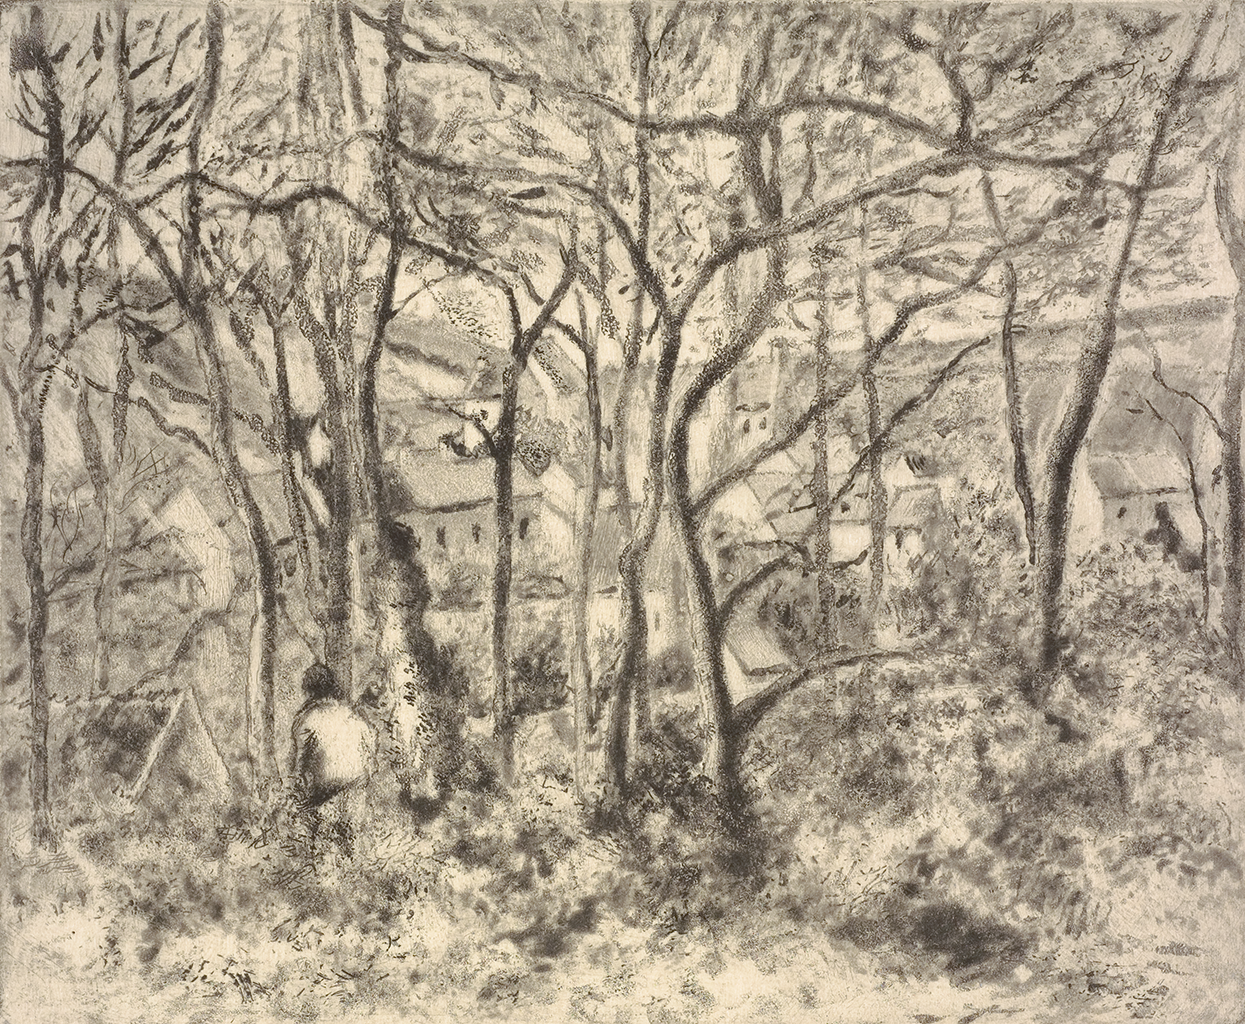 A photograph of a sketch of black with thin leave on the trees overlooking a large town.